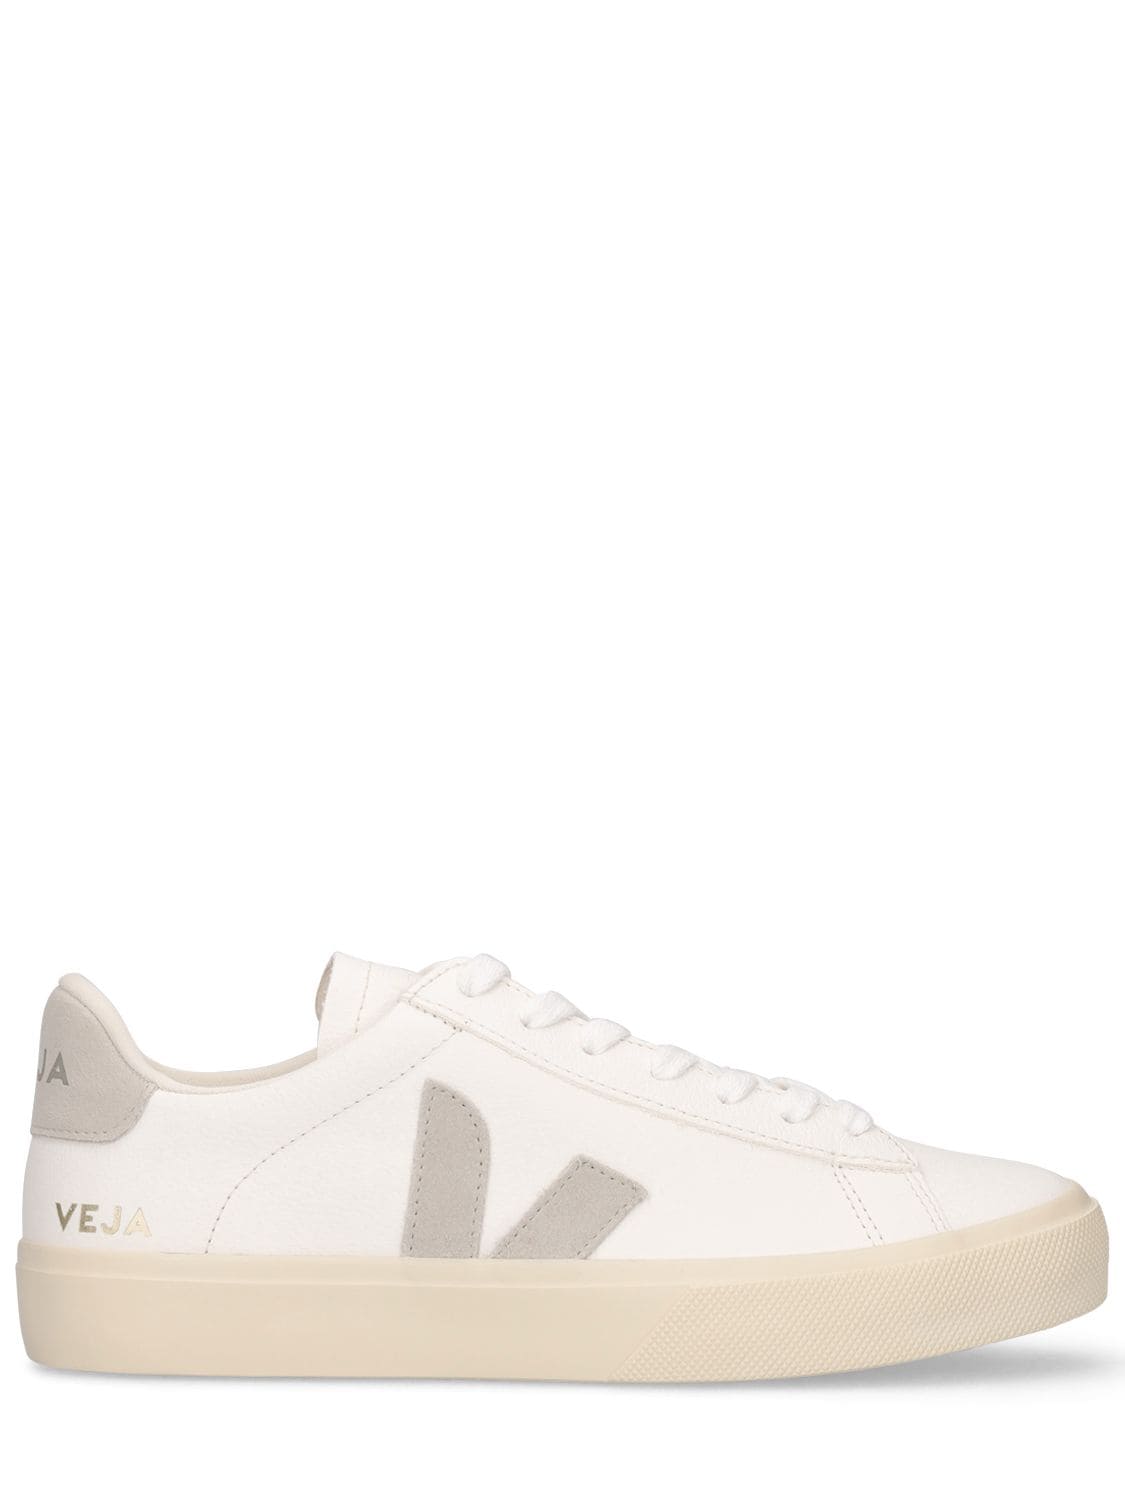 VEJA CAMPO LOW LEATHER trainers